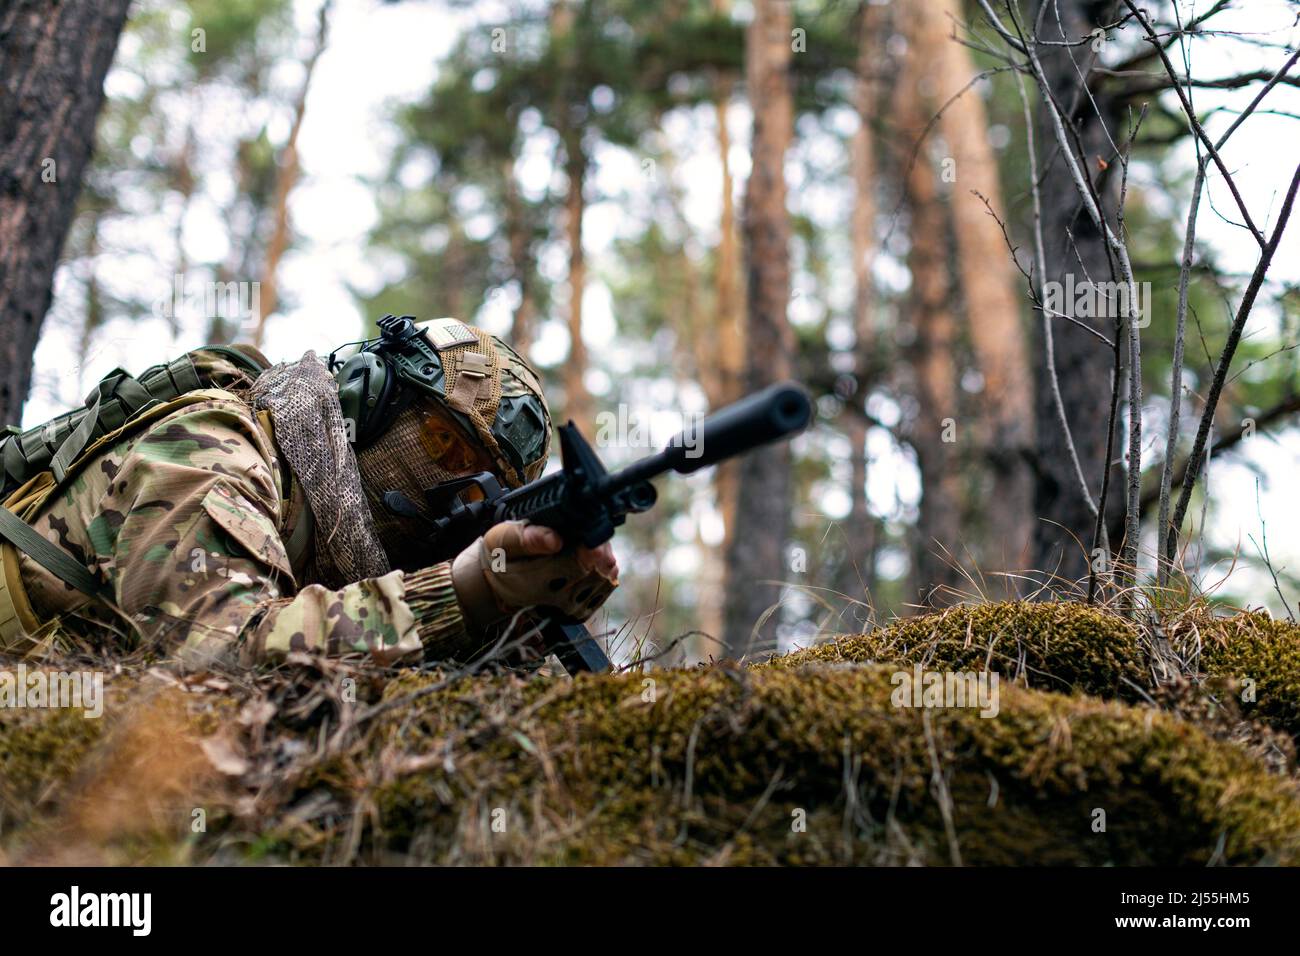 Photo of a soldier aims at the enemy during a clash in the forest. The concept of modern warfare and special forces. Cropped image. Stock Photo